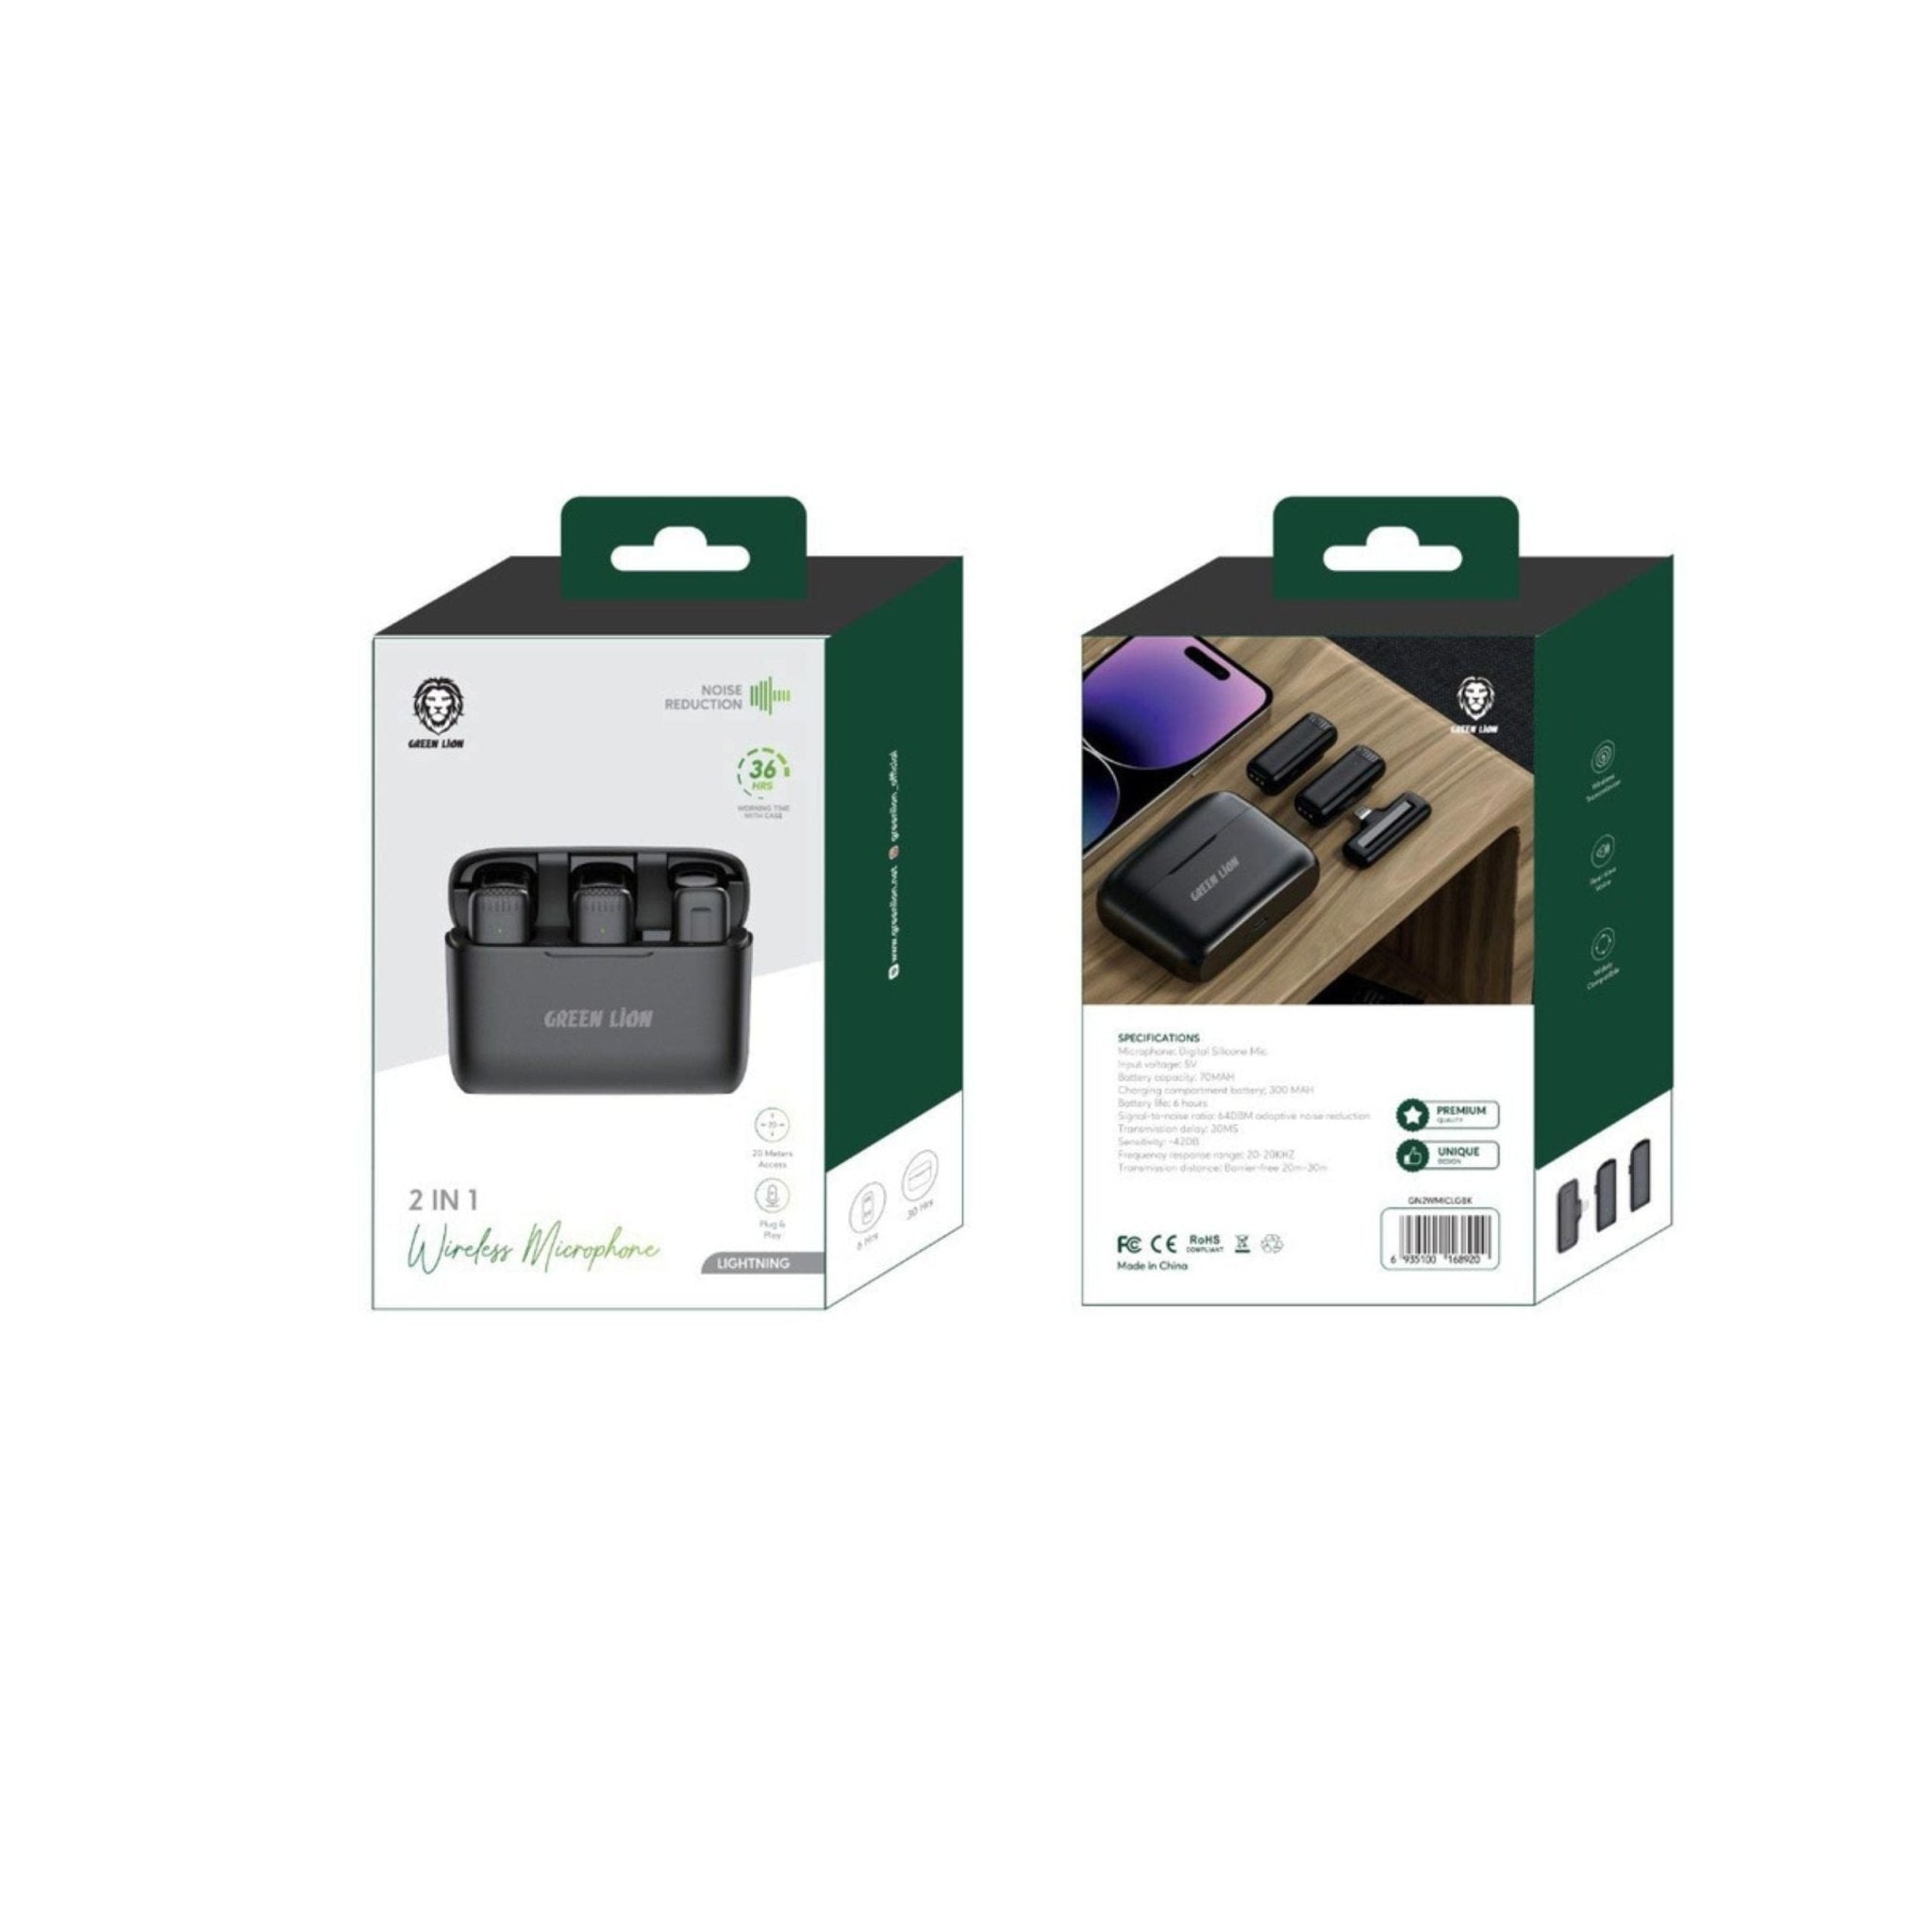 Green Lion 2 in 1 Wireless Microphone (Lightning Connector) - Black